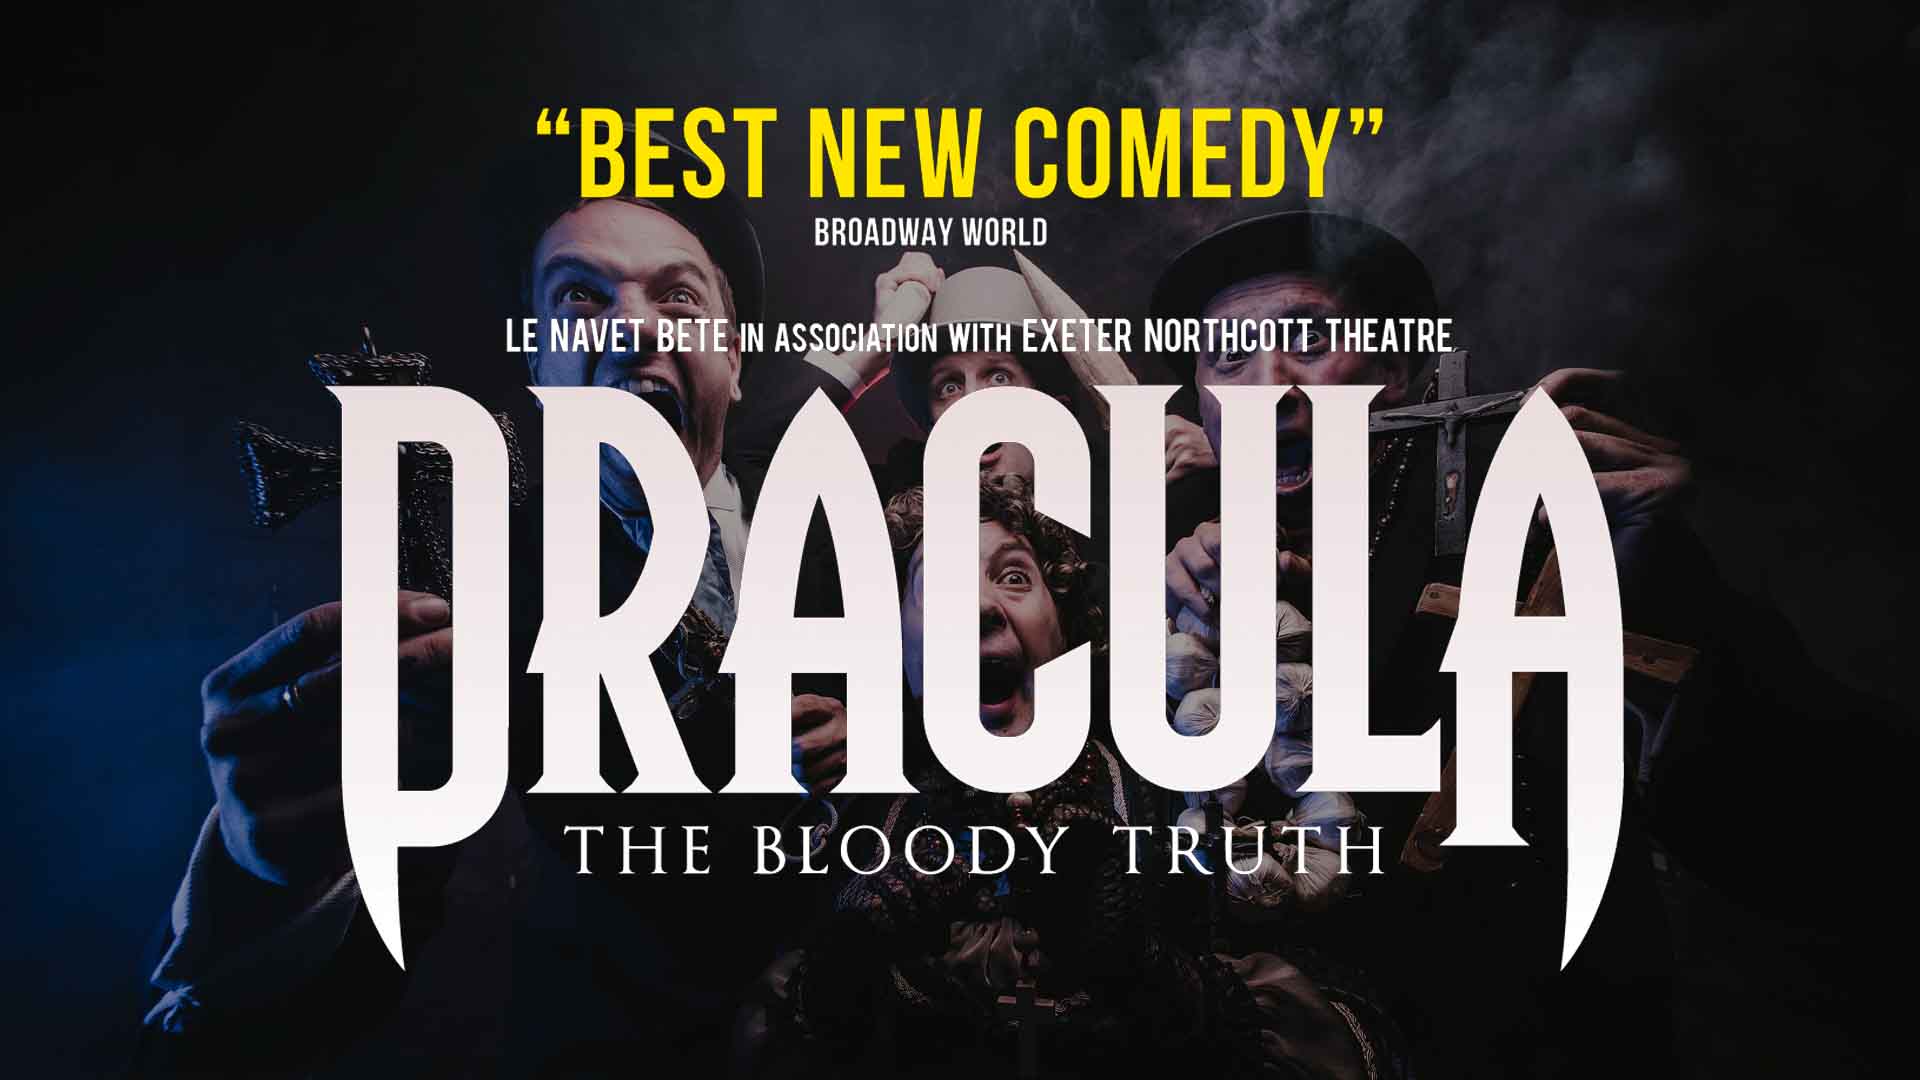 Dracula: The Bloody Truth